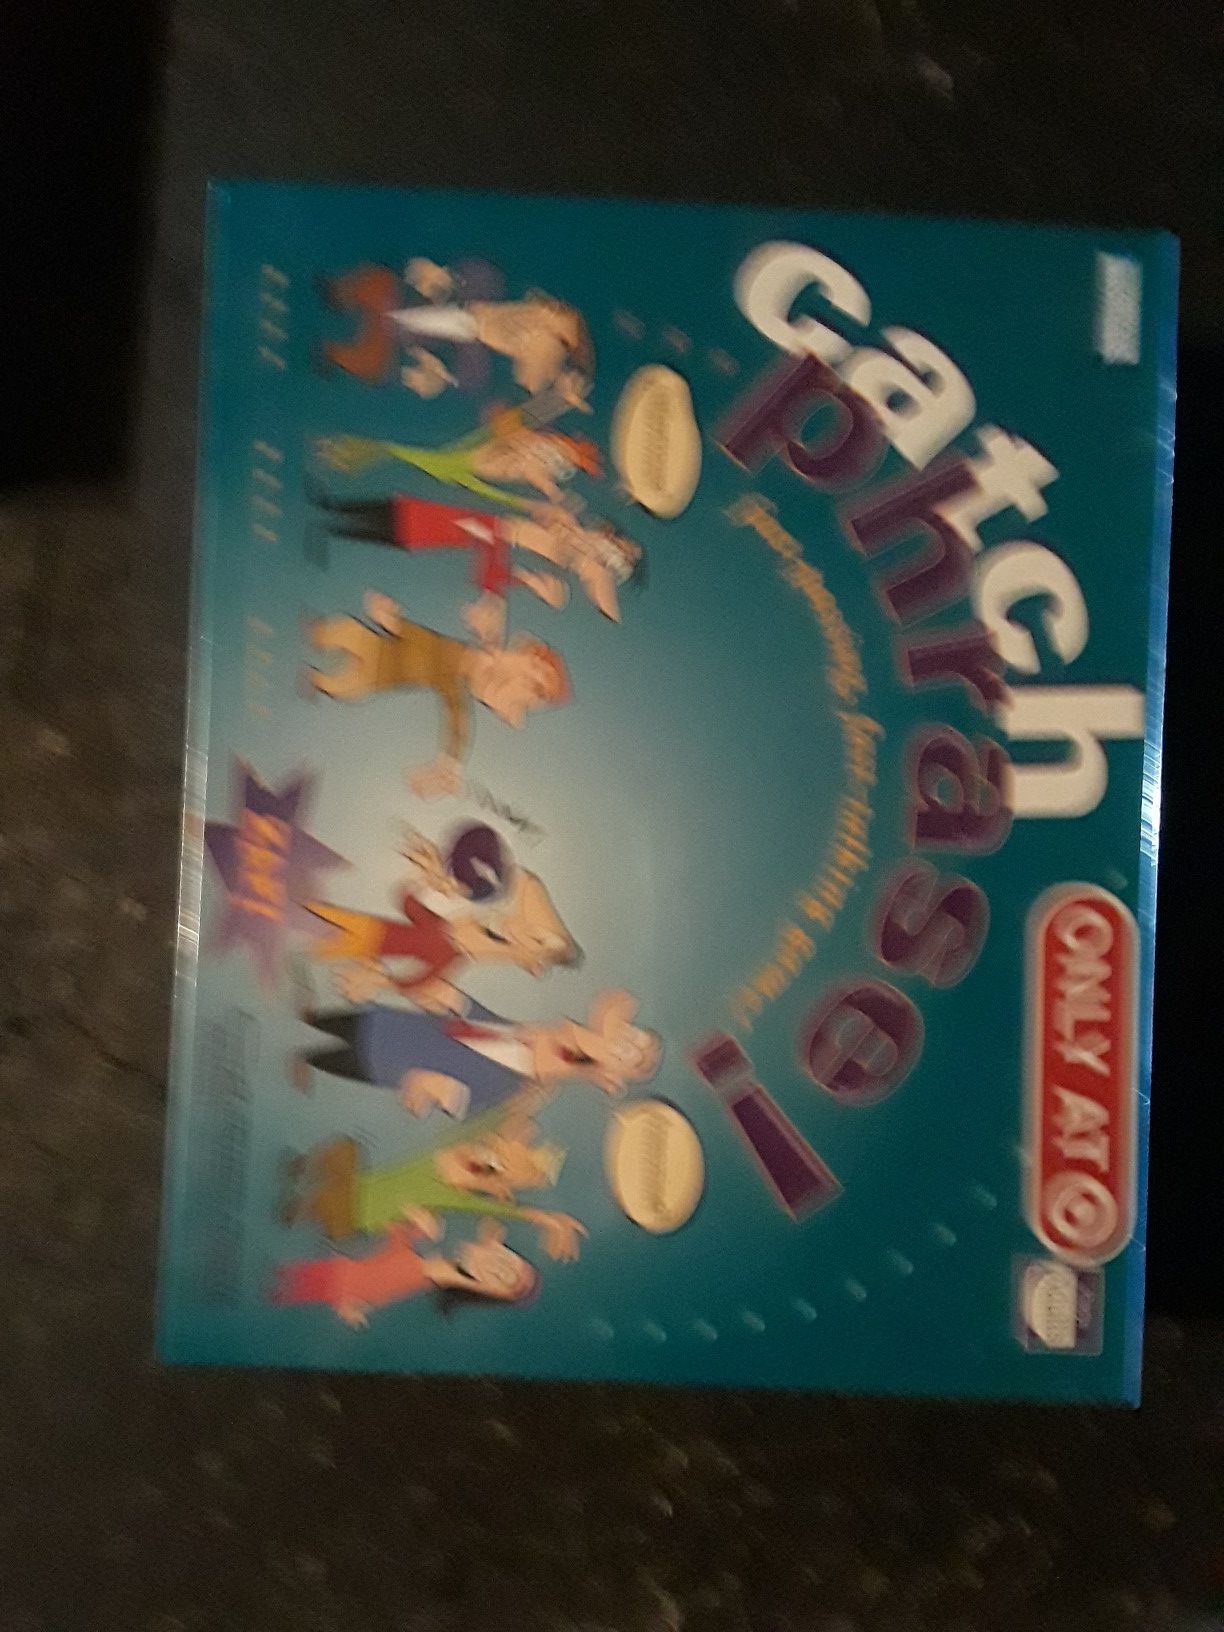 Catchphrase the board game